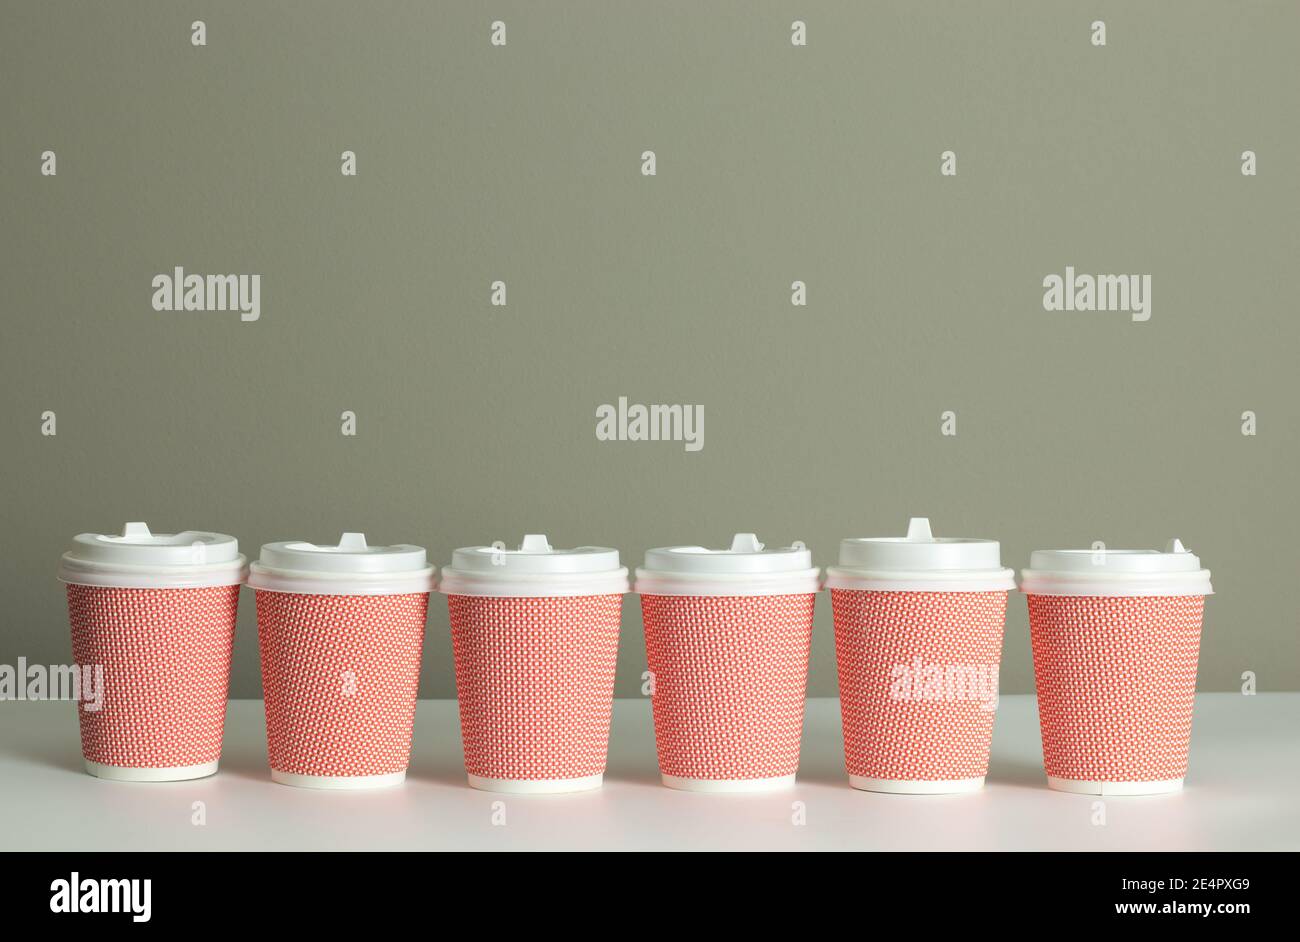 Row or line of coffee cups on desk with copy space background. Coffee commercial template design. Mock up for coffee takeout or takeaway business Stock Photo